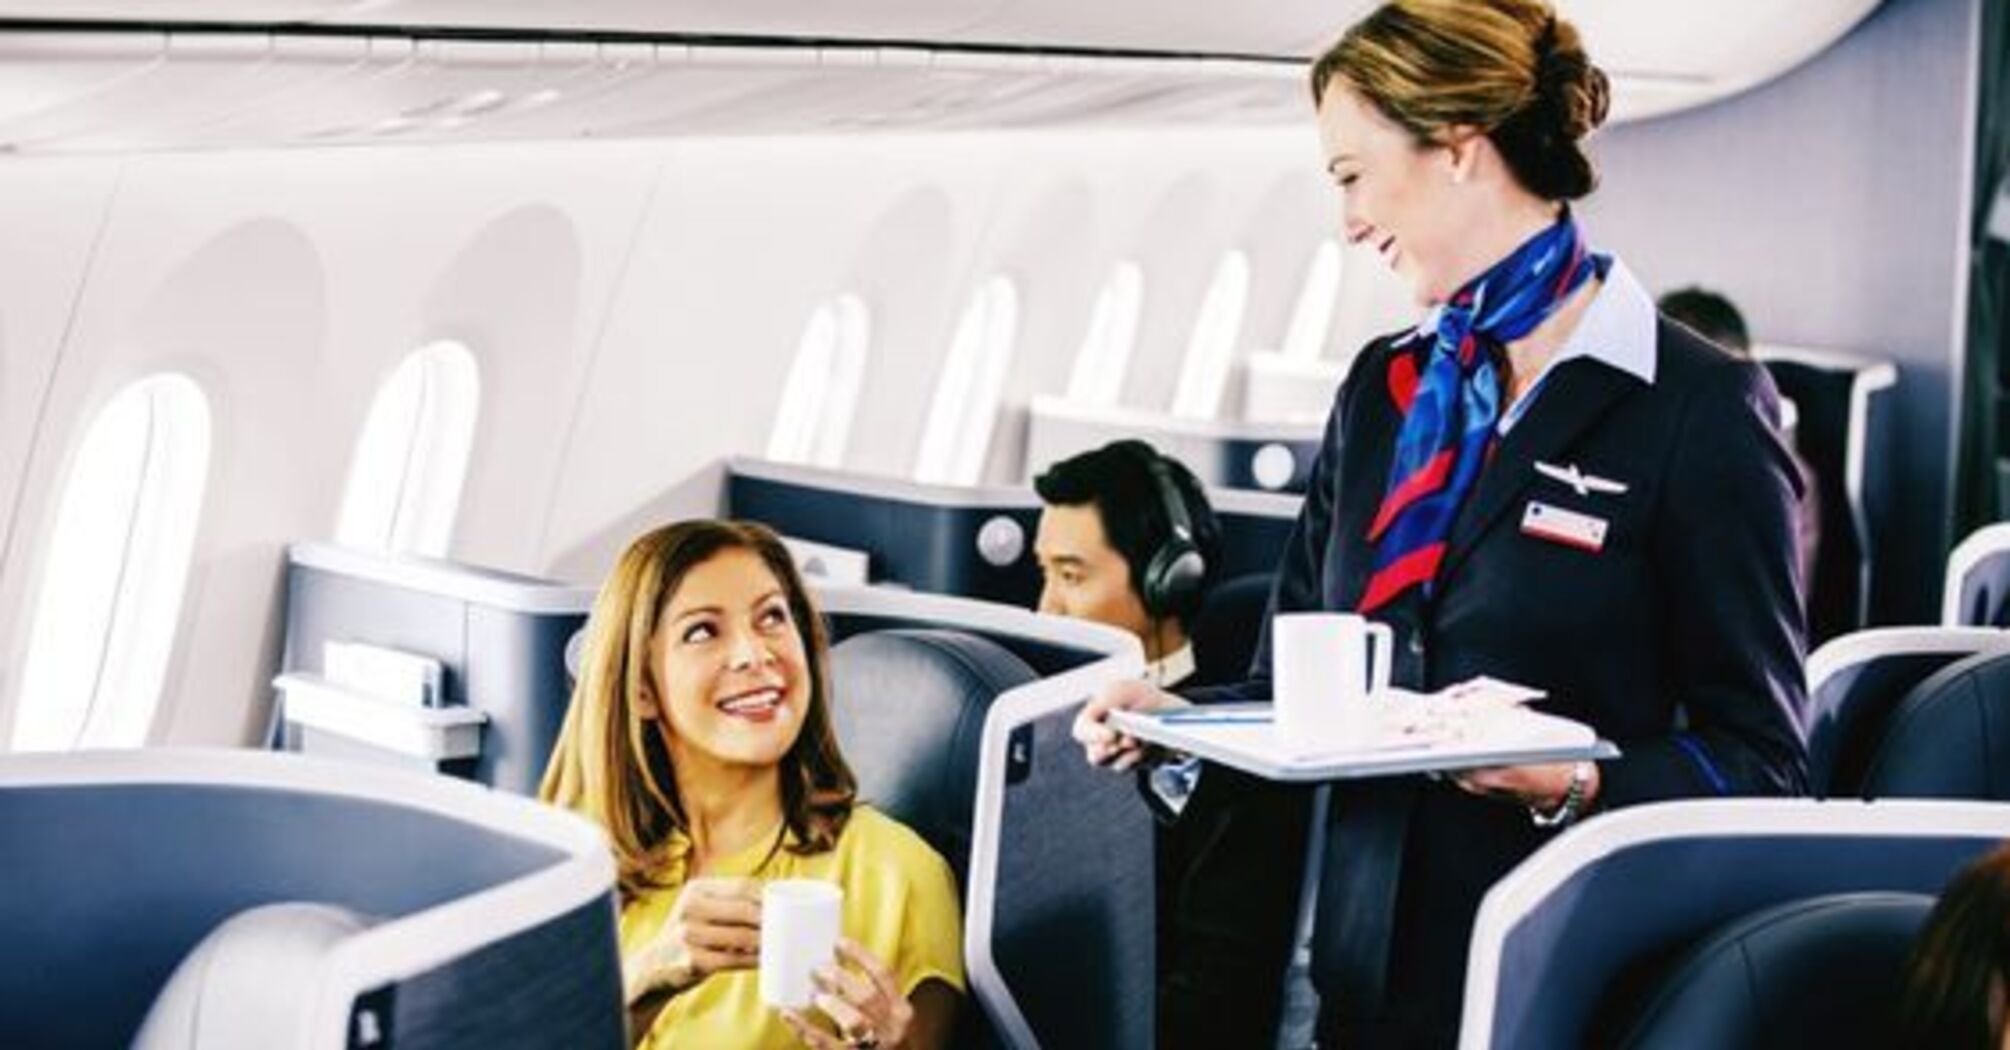 Whether To Tip Flight Attendants What Experts Advise